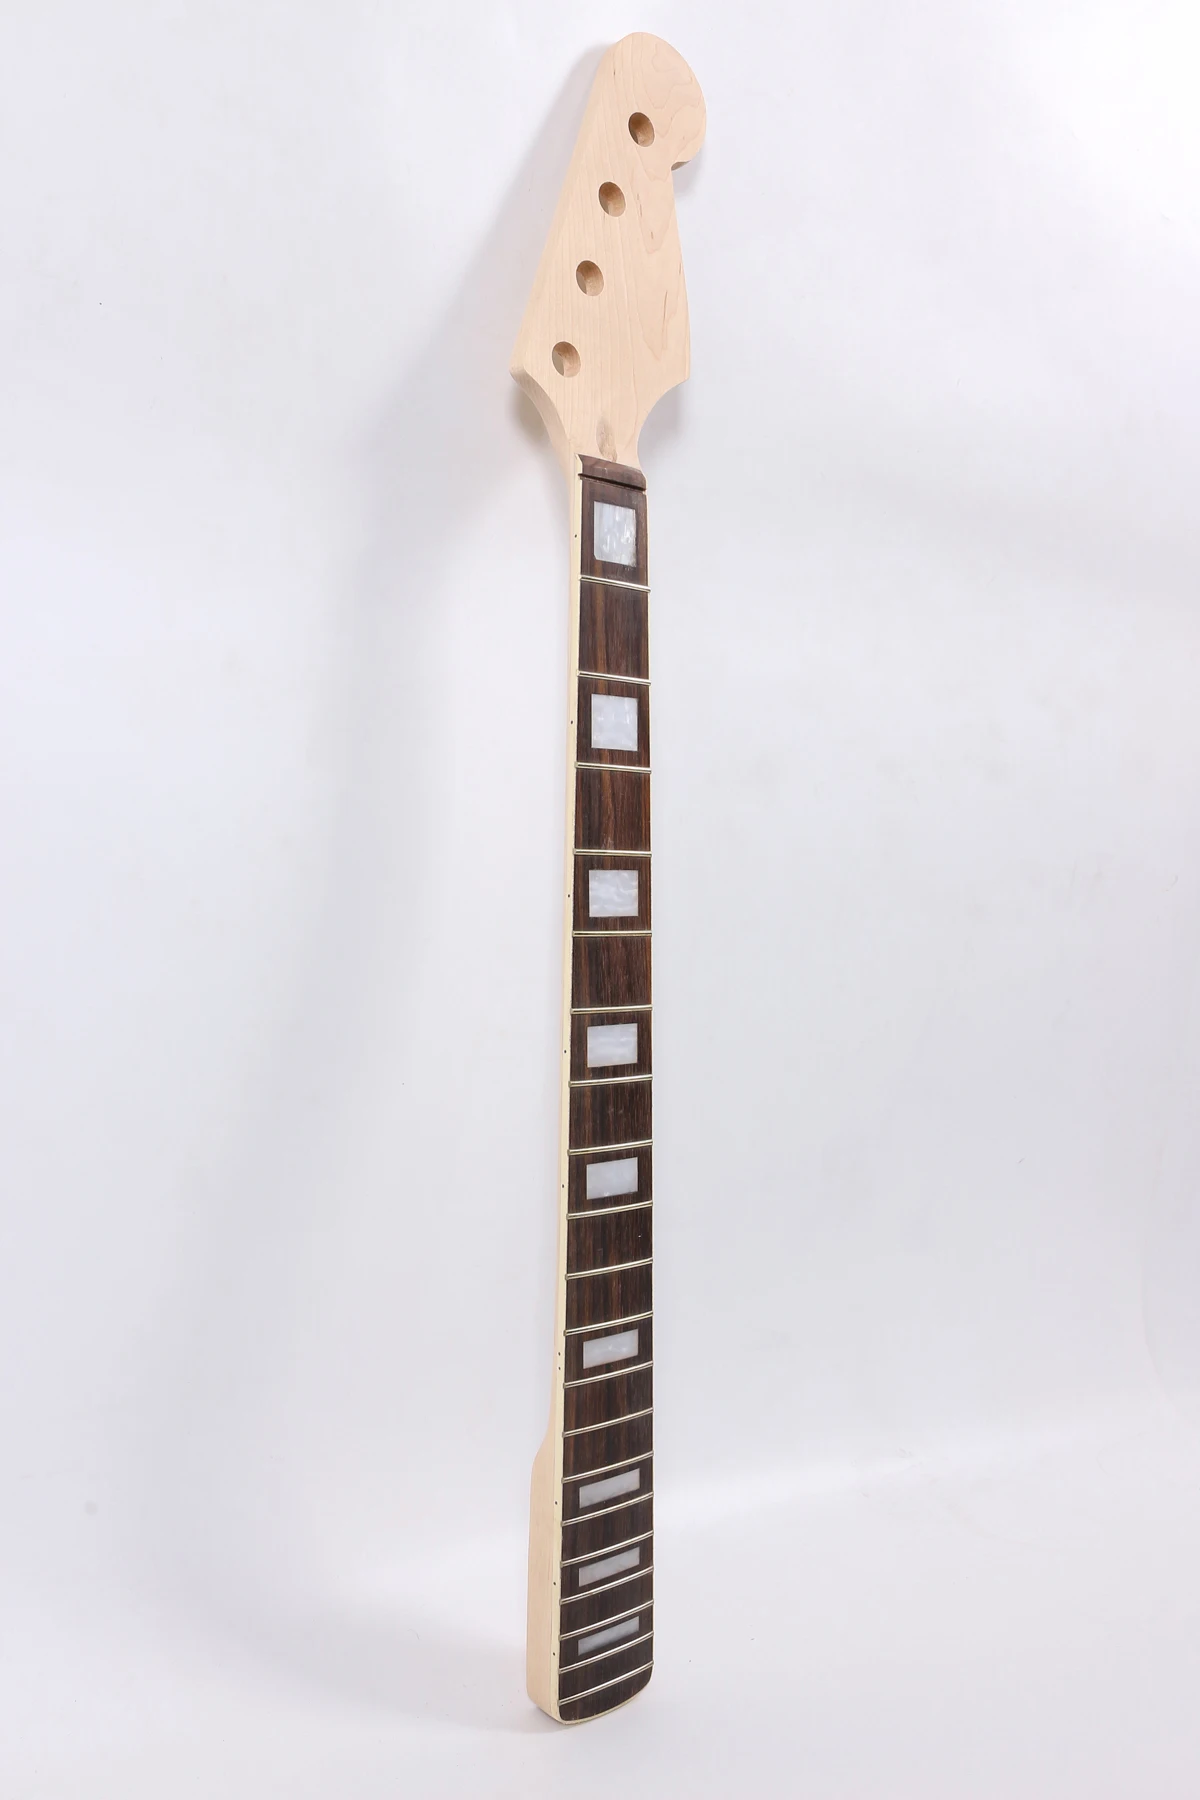 Yinfente Electric Guitar Bass Neck Replacement 24 Fret 34 Inch Maple Rosewood Fretboard Unfinished 